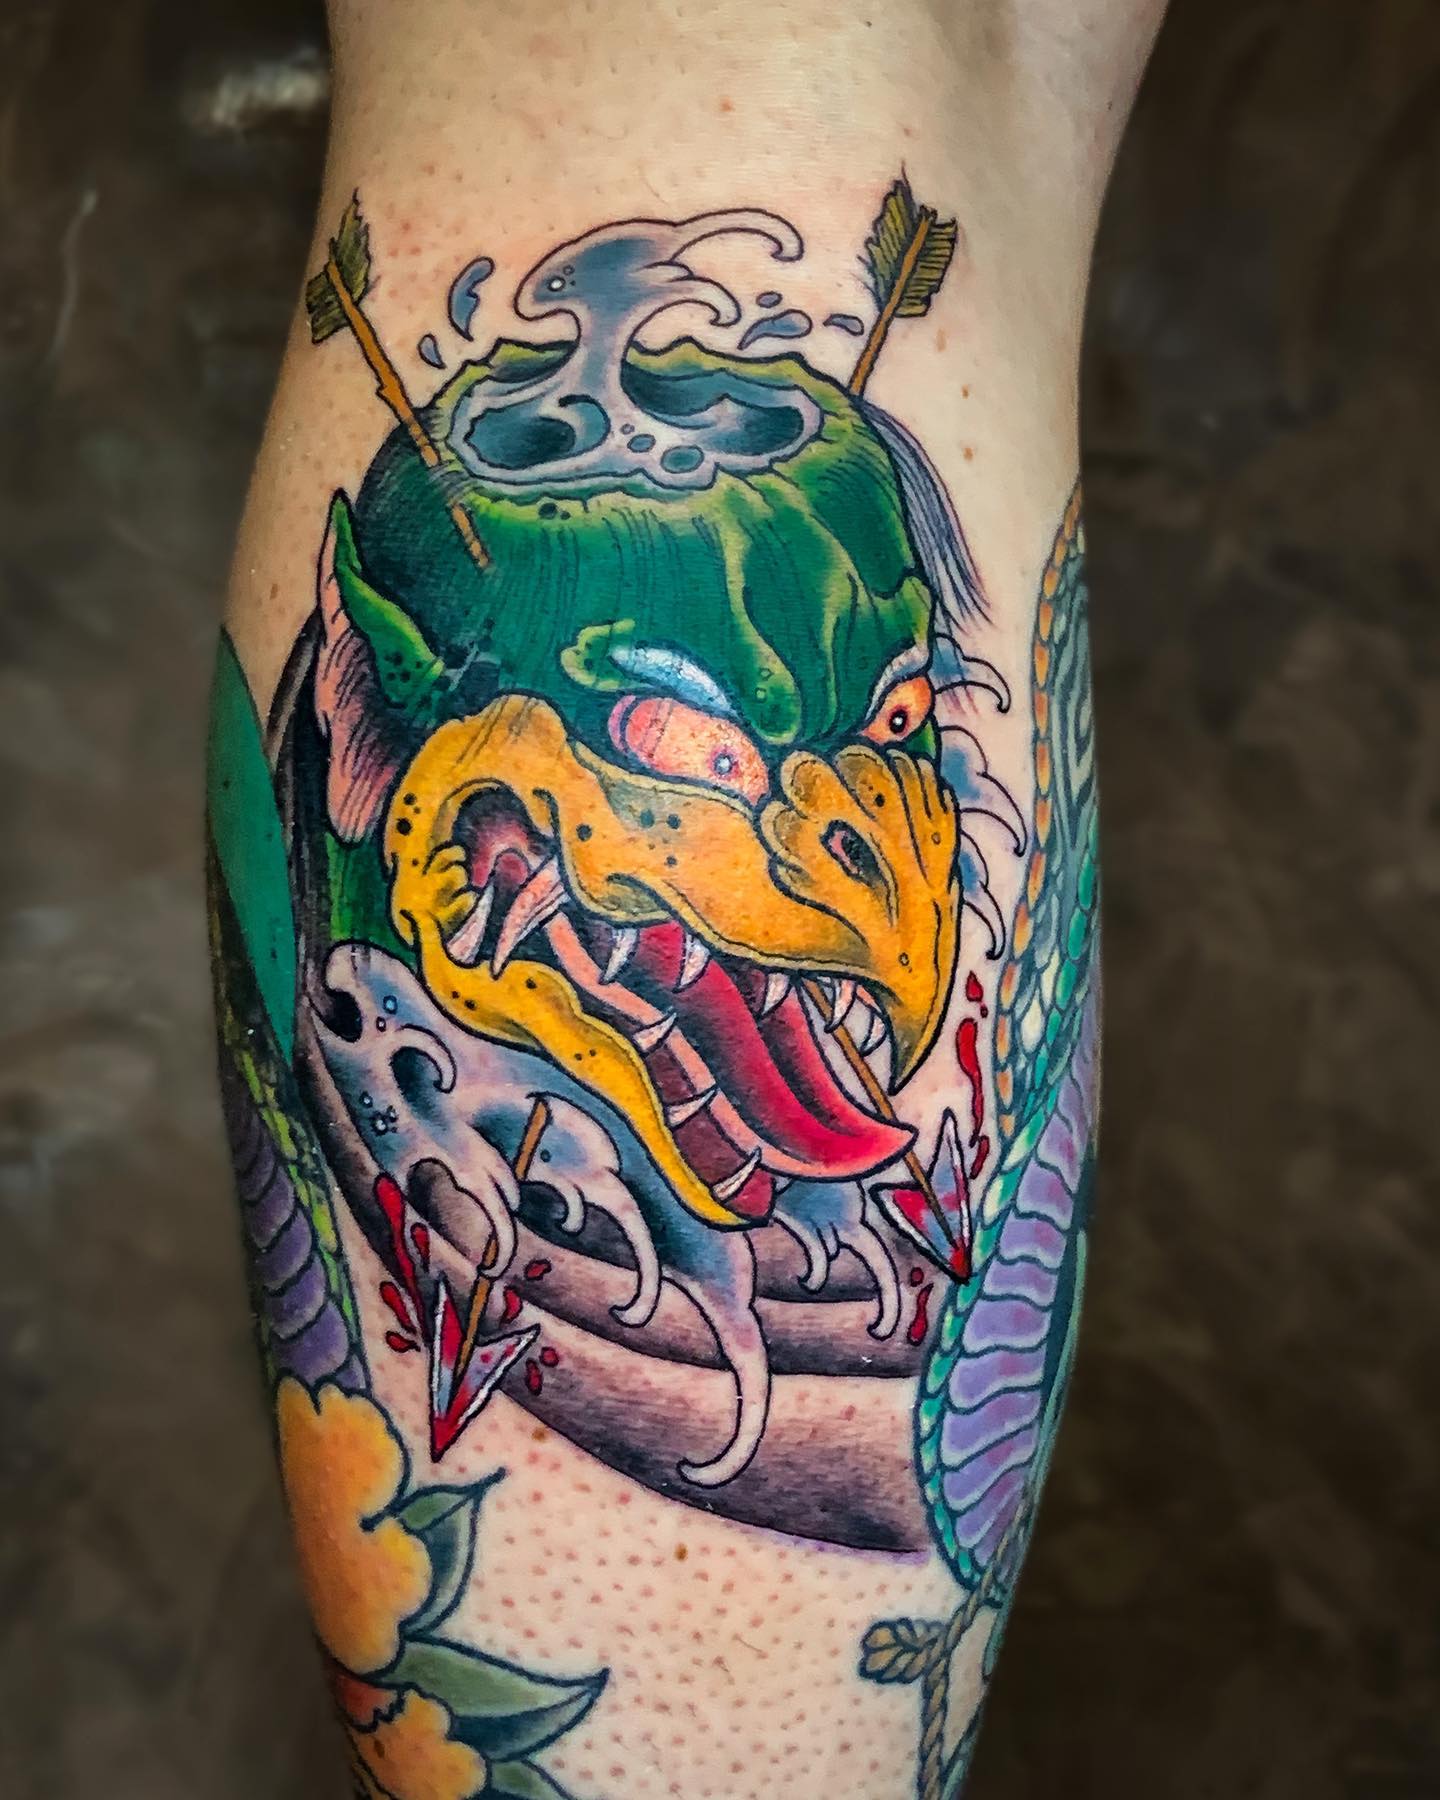 Another addition to @auswurf 's calf, always a pleasure 

Here‘s „The Calf Kappa...